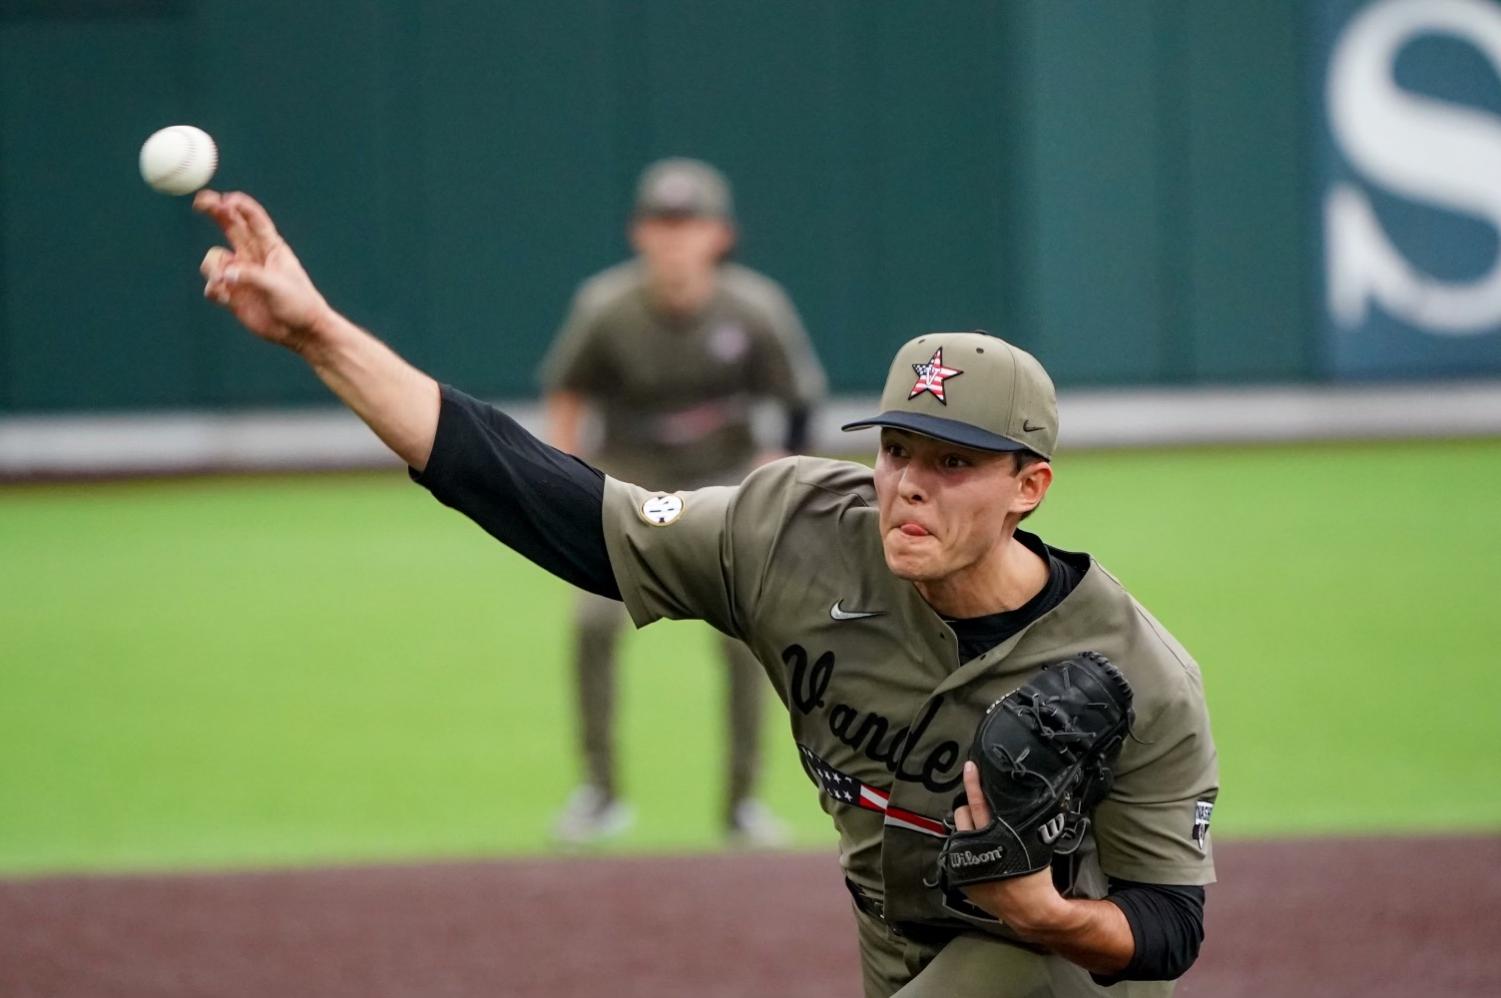 3 things to know about Jack Leiter's big debut with Vanderbilt baseball